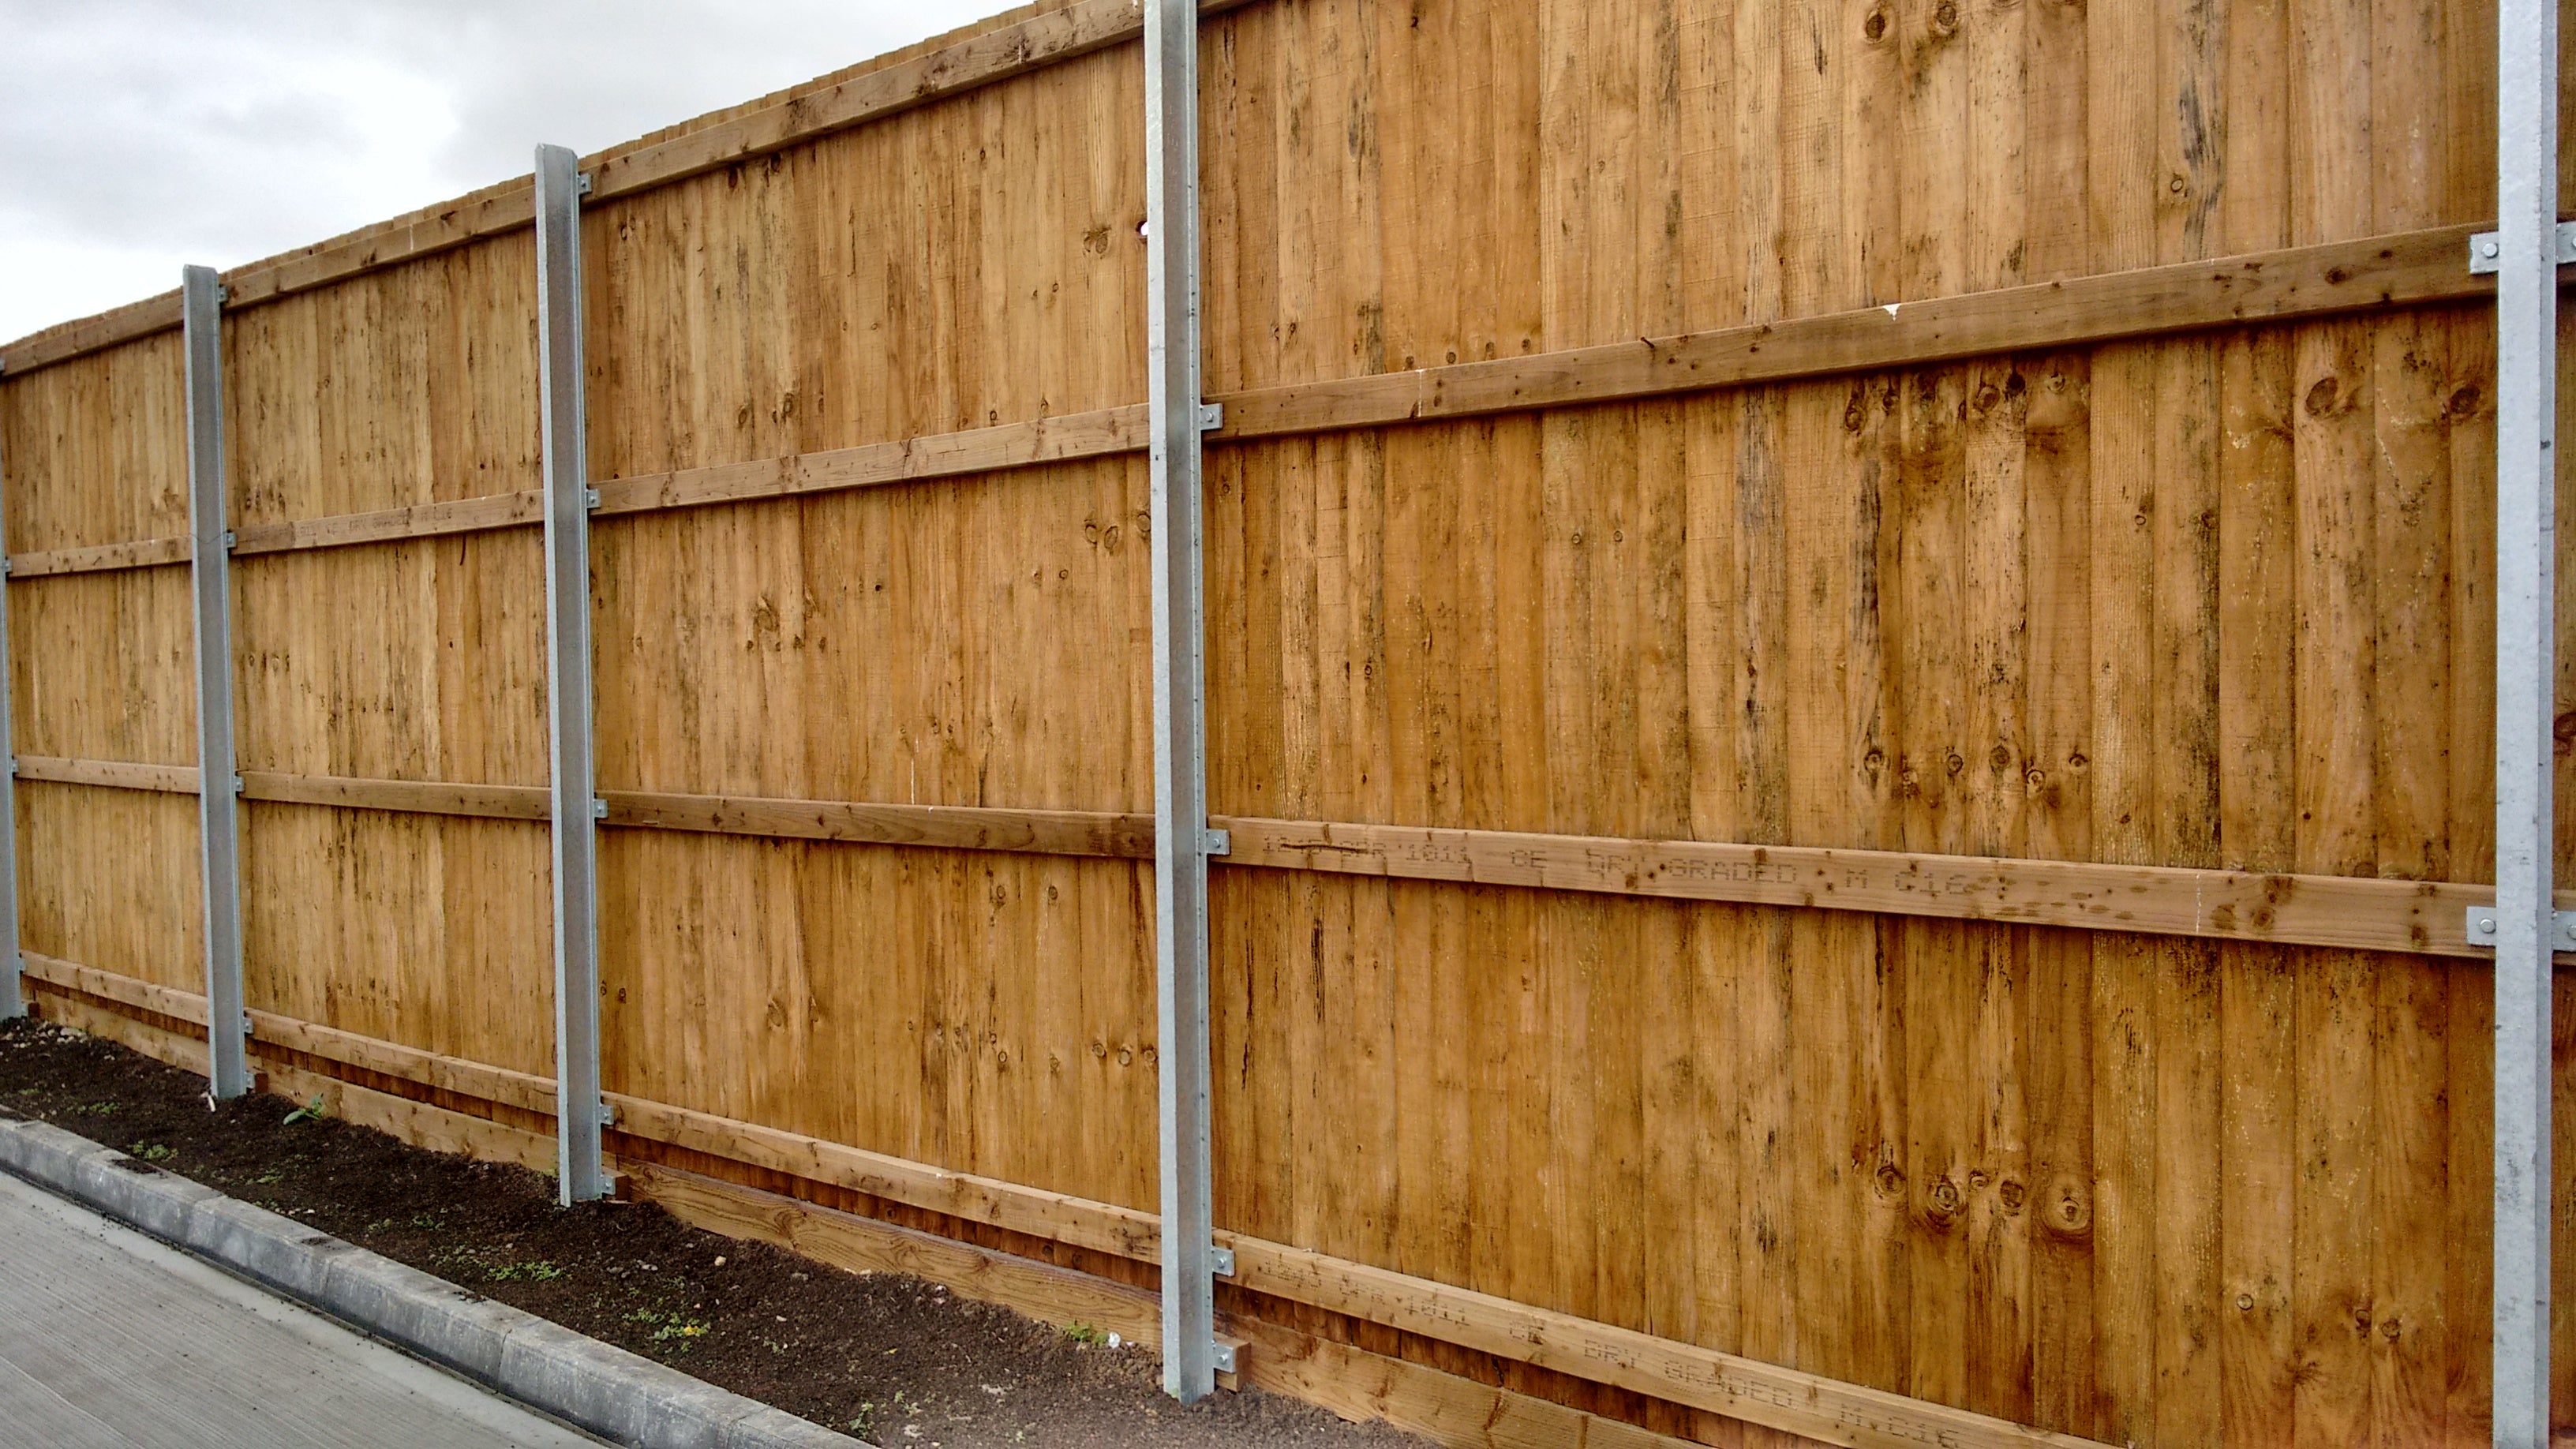 Timber acoustic fence installation at urban setting